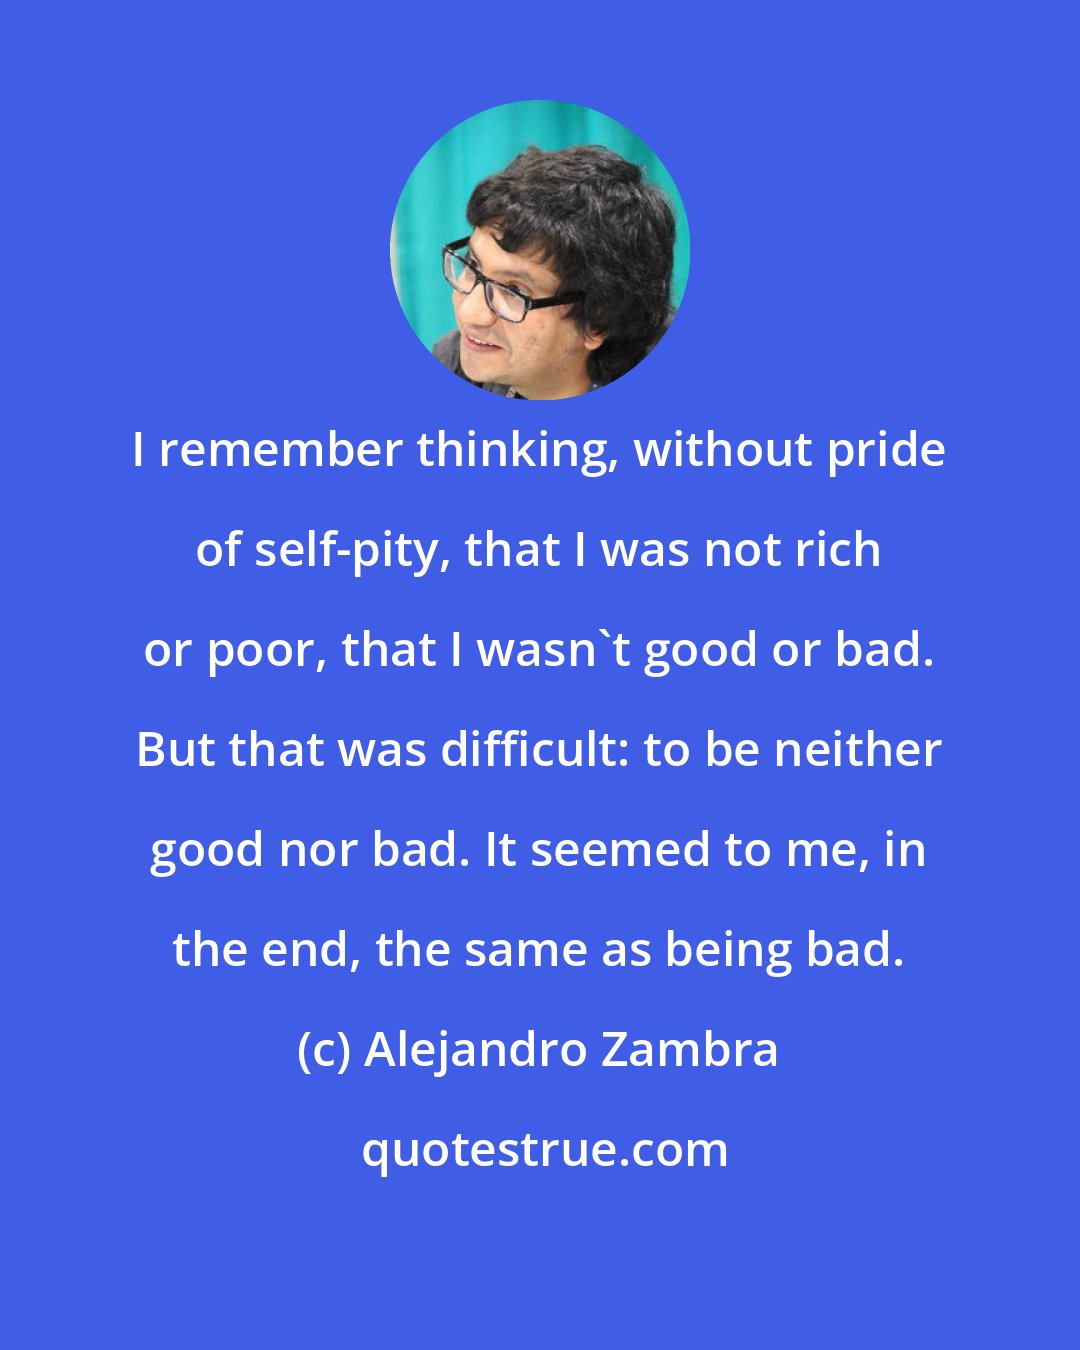 Alejandro Zambra: I remember thinking, without pride of self-pity, that I was not rich or poor, that I wasn't good or bad. But that was difficult: to be neither good nor bad. It seemed to me, in the end, the same as being bad.